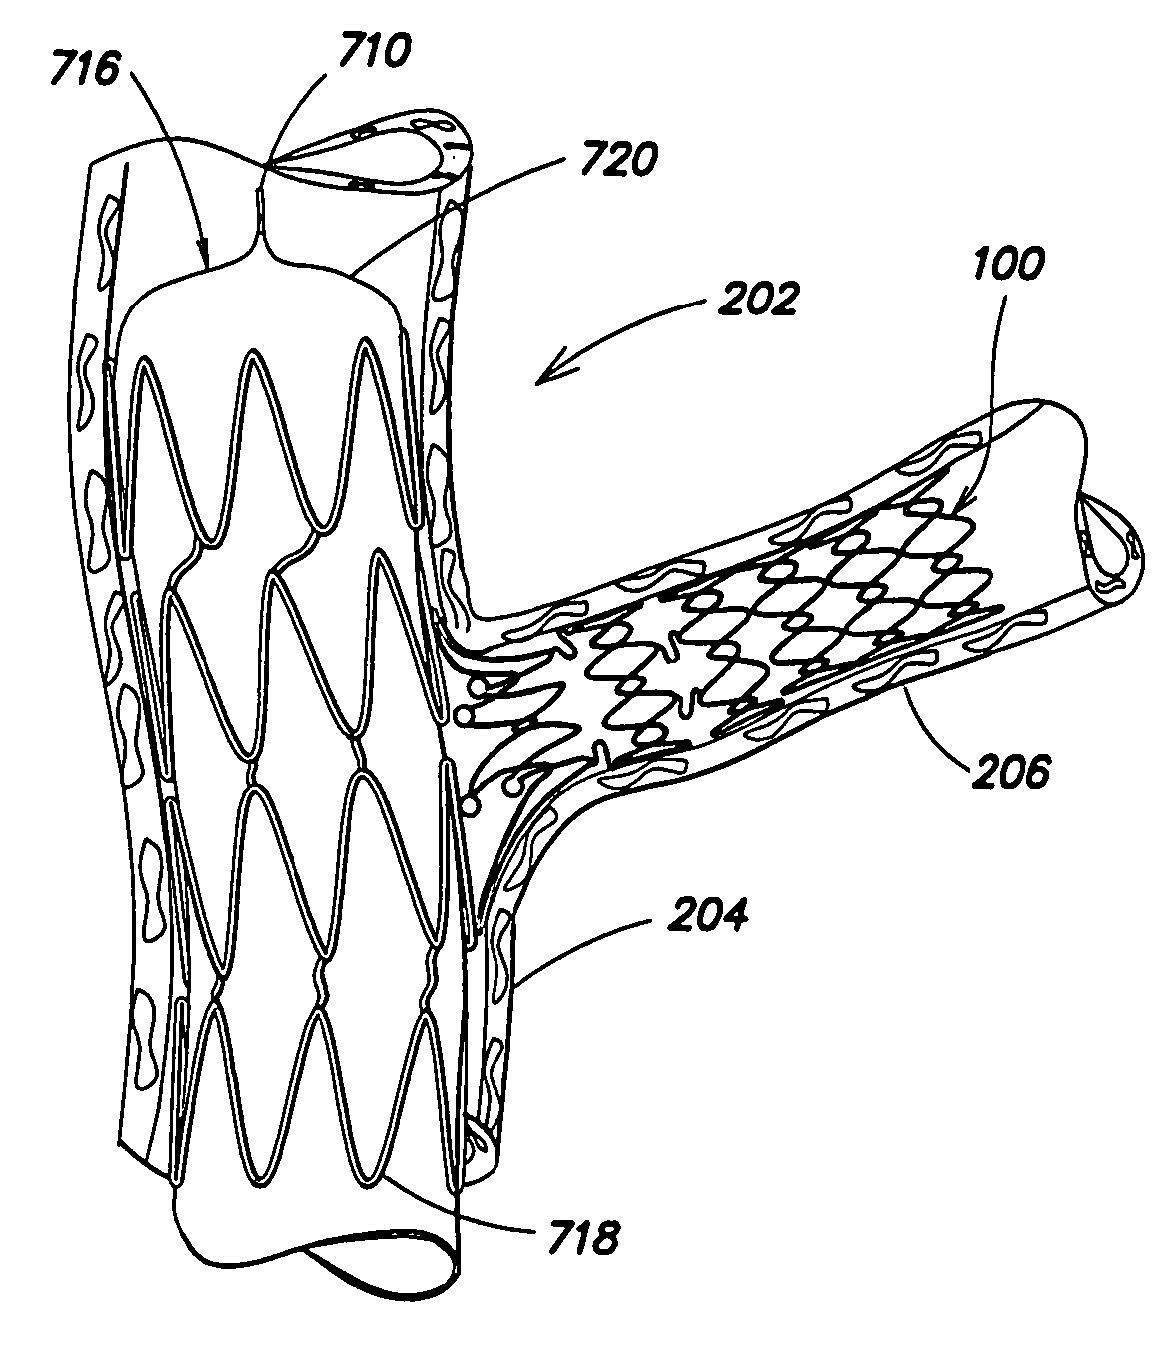 Segmented ostial protection device